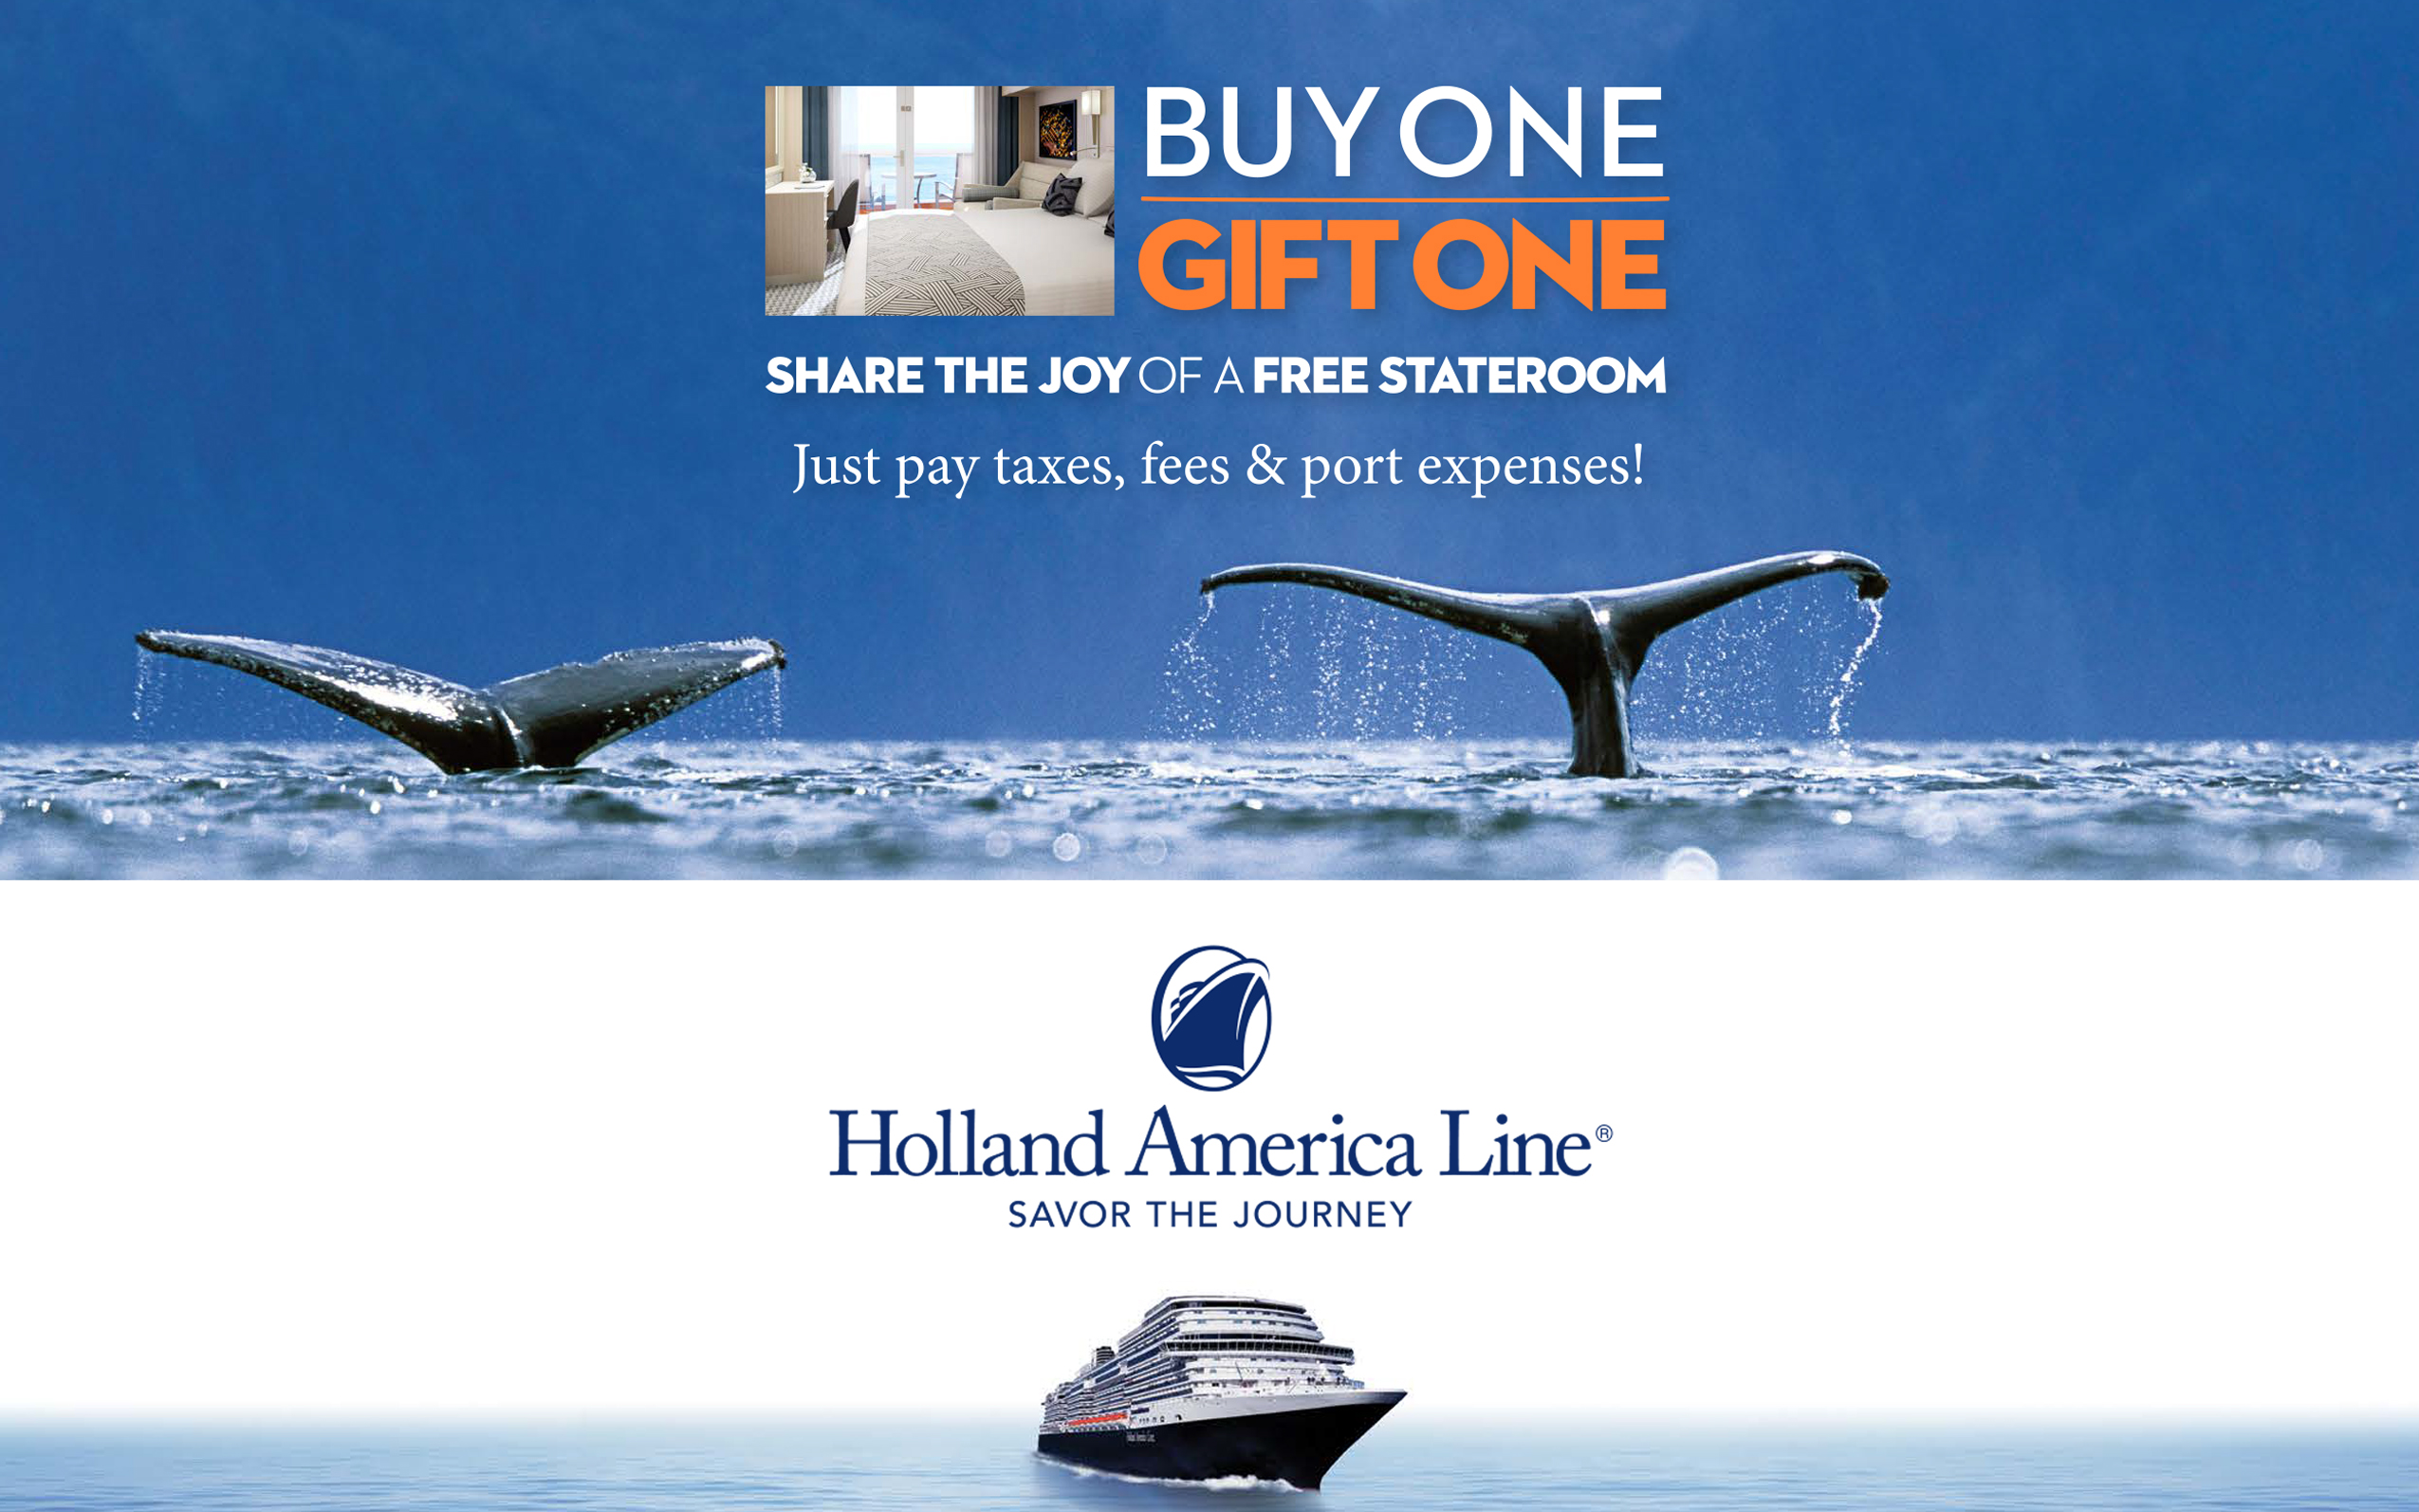 Luxury Cruise Connections Buy One Gift One with Holland America